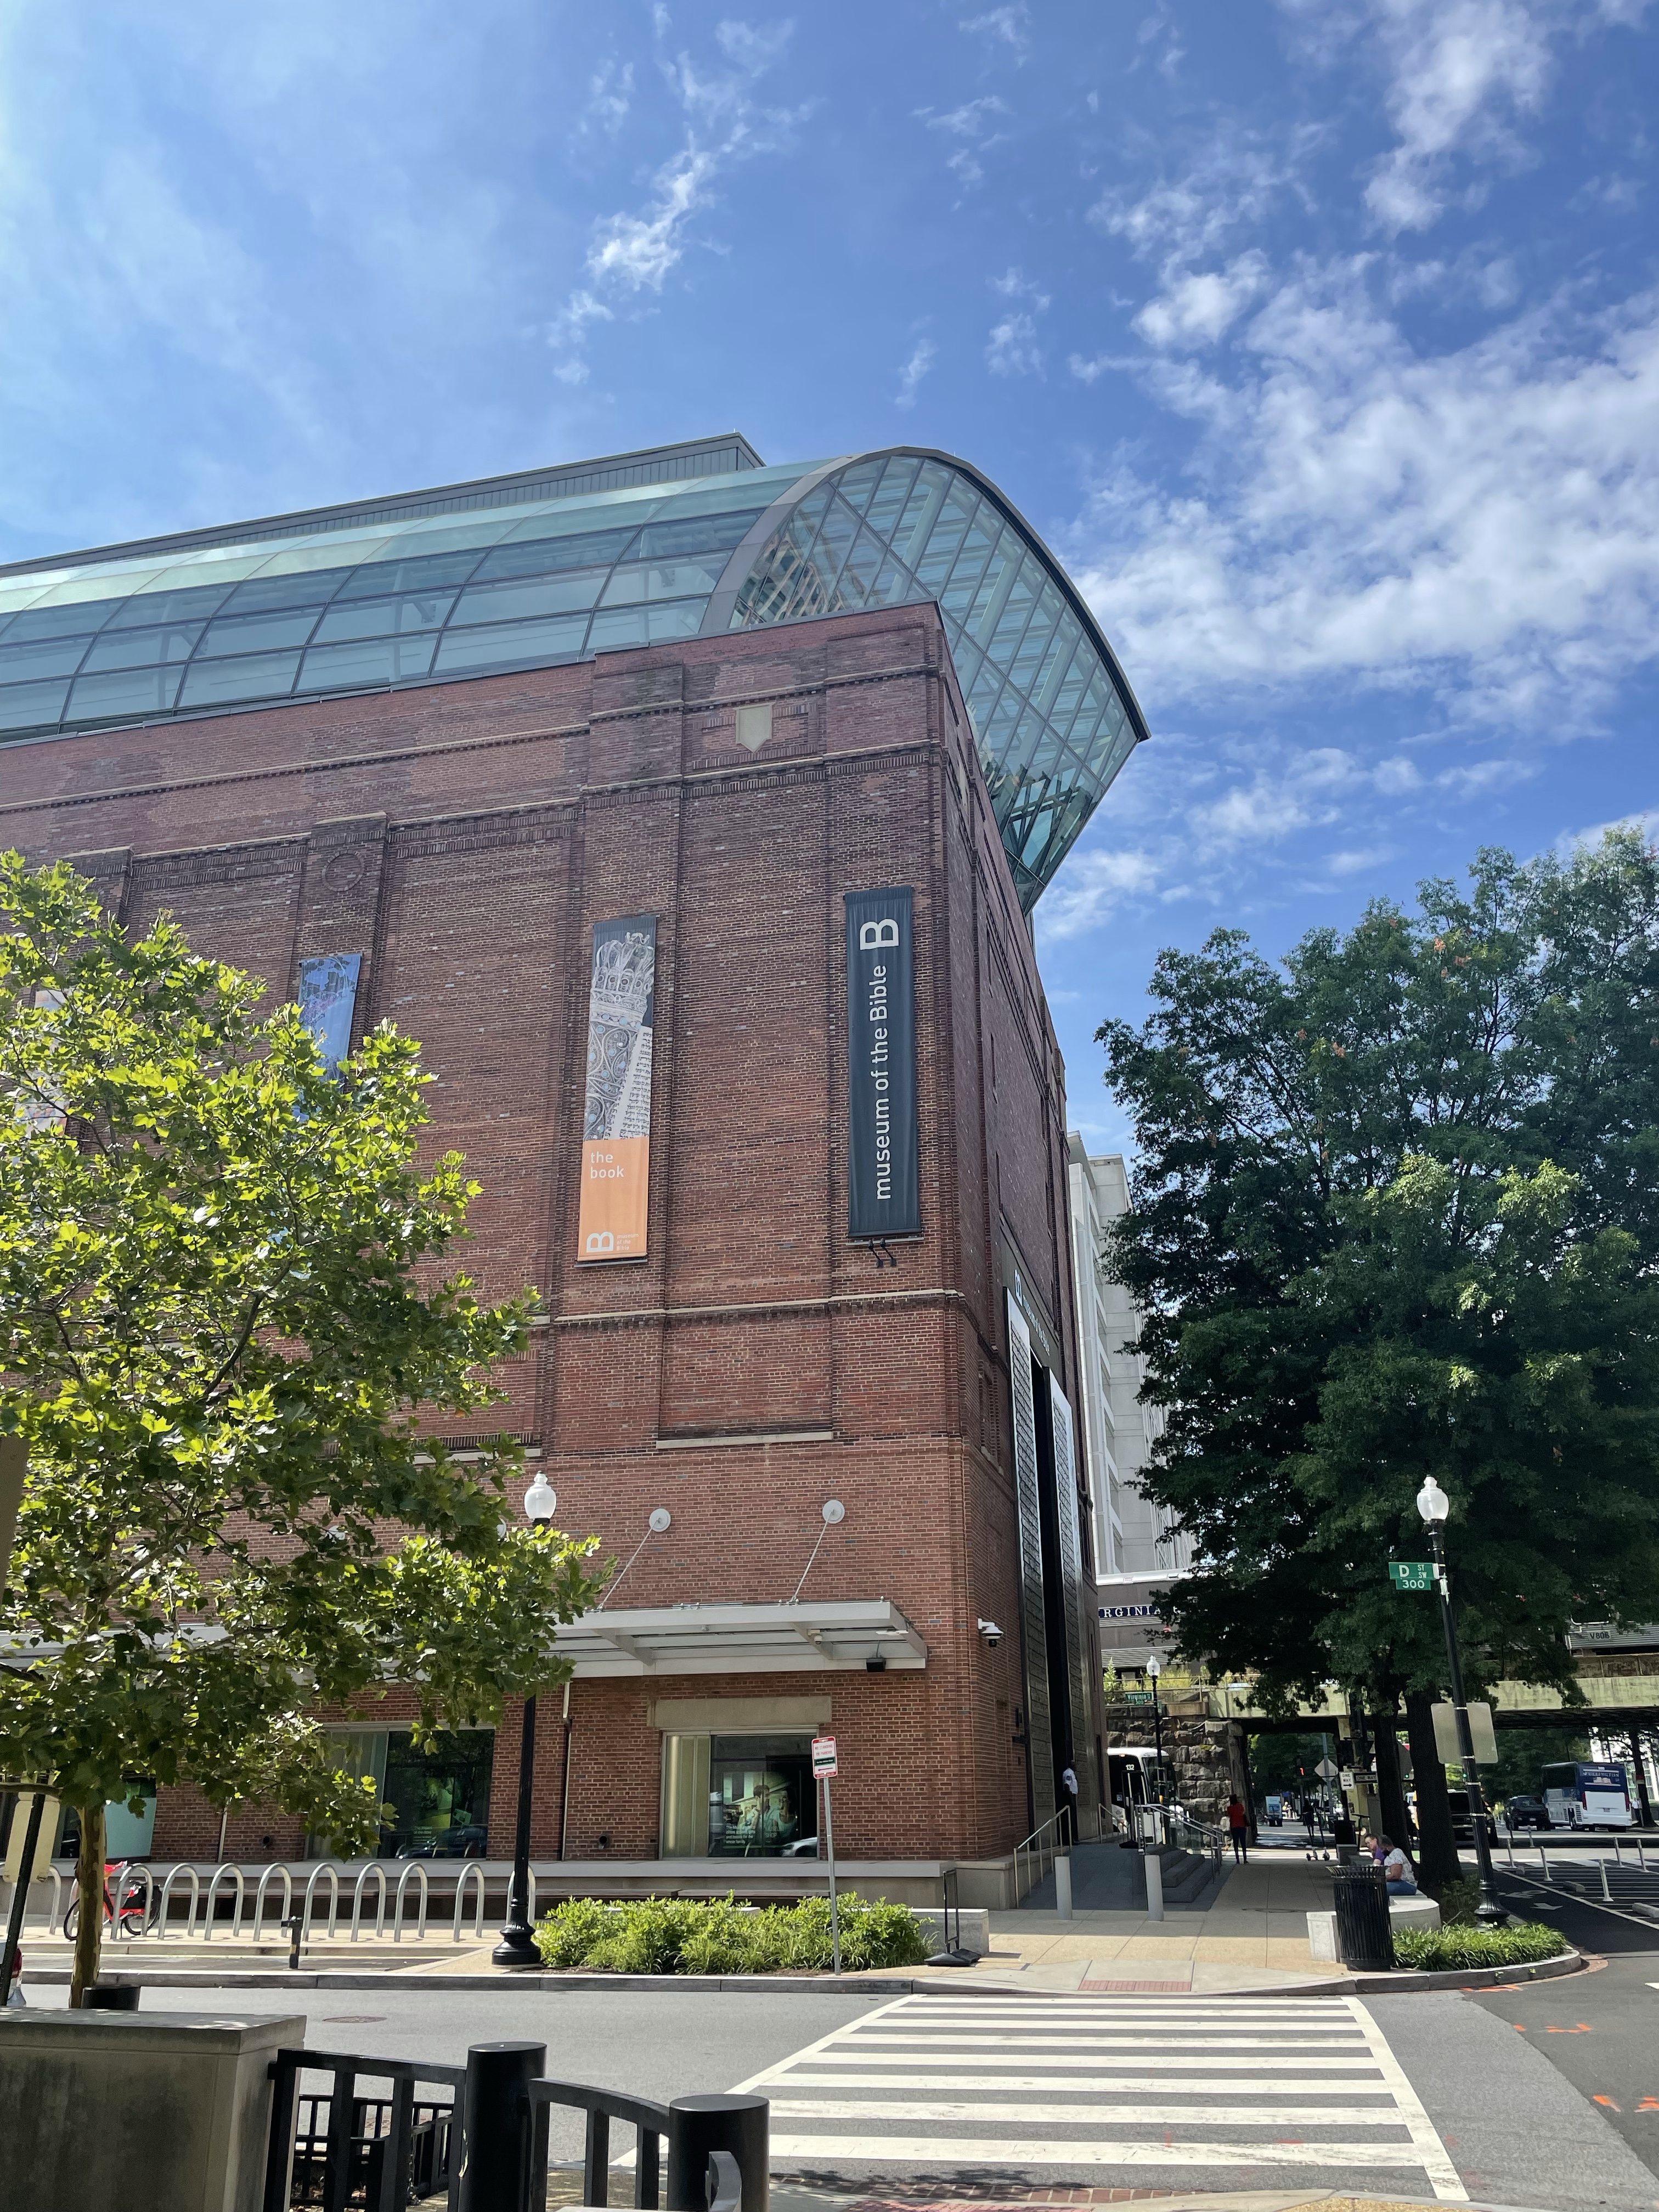 10 Reasons to visit the Museum of the Bible in Washington DC + Tips for your upcoming visit.